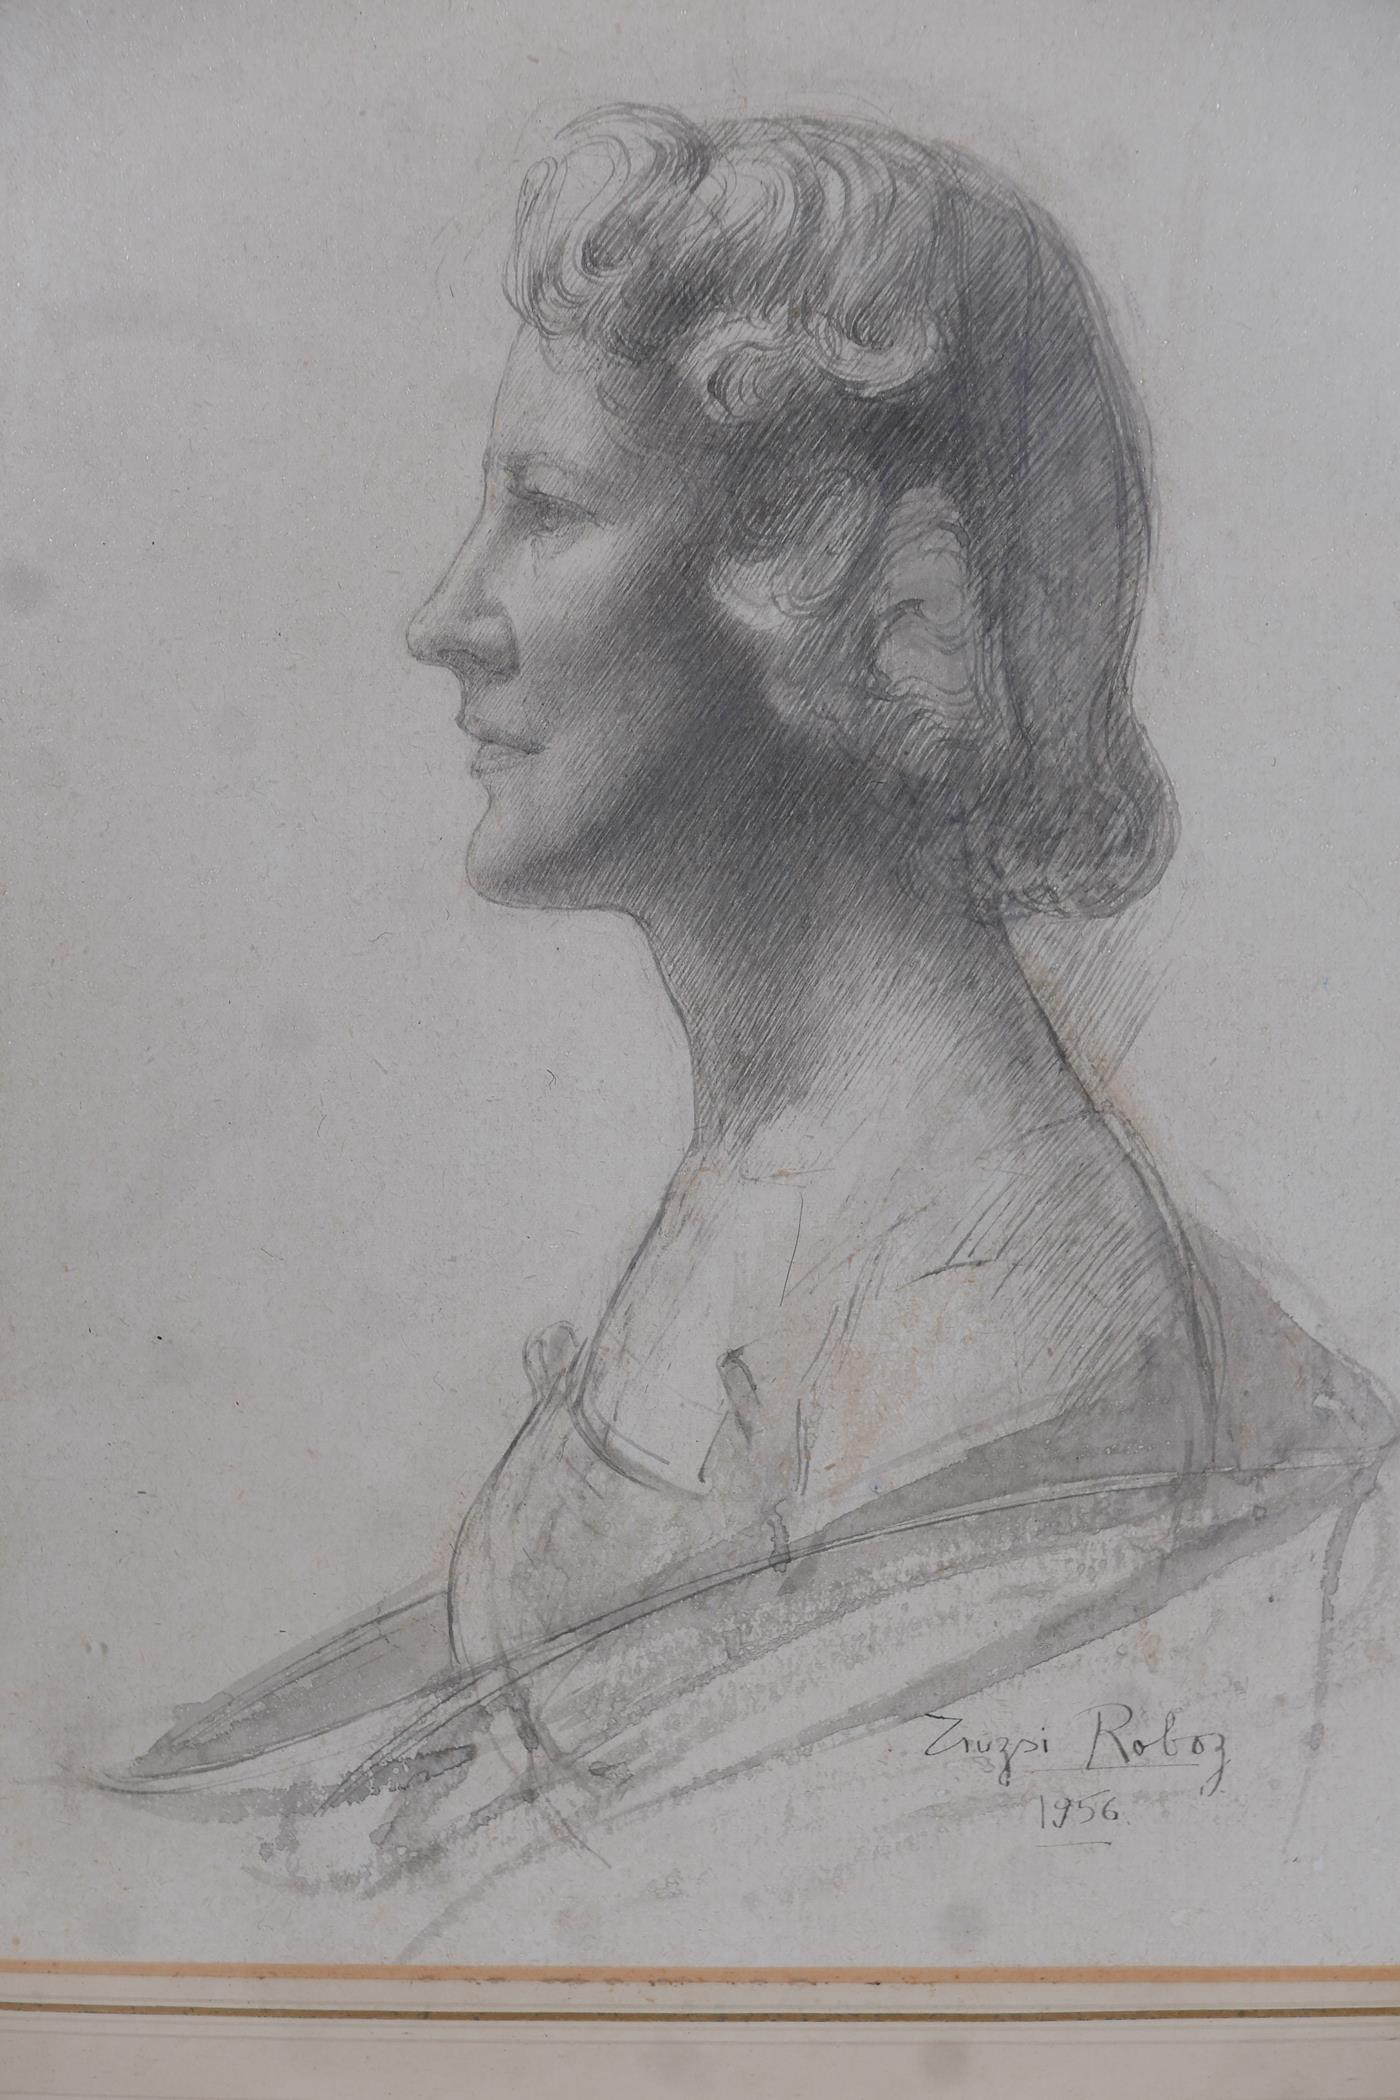 Zsusi Roboz, portrait of a woman in profile, pen and wash, signed and dated 1956, labelled verso